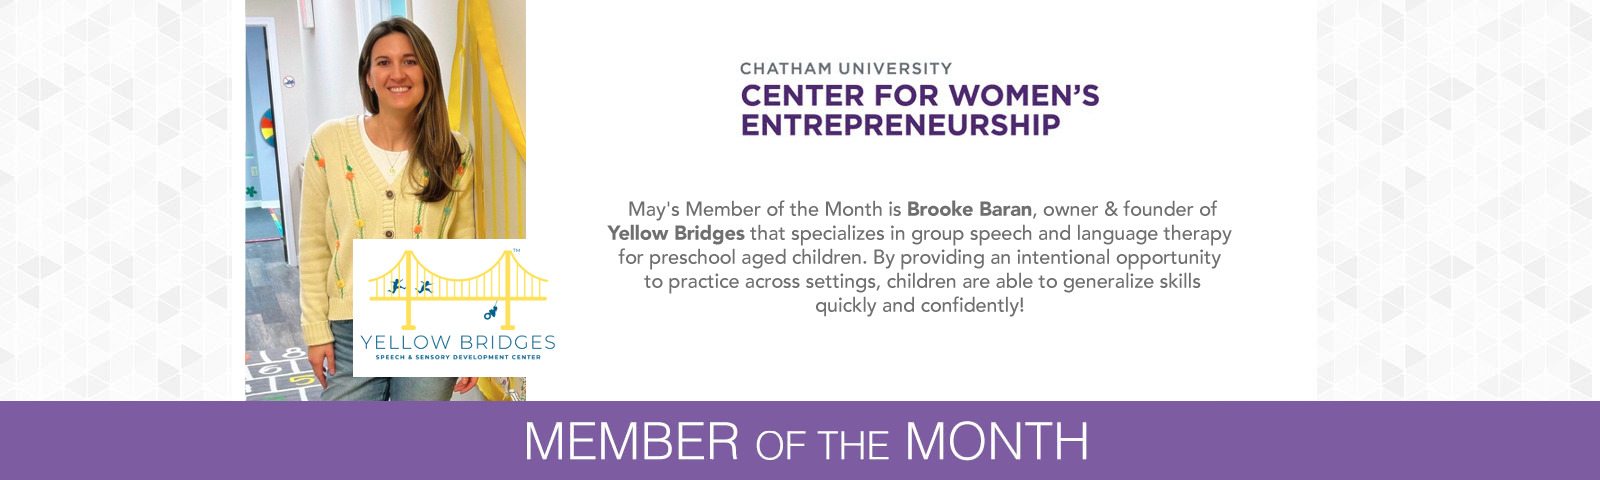 The May Member of the Month is Brooke Baran, owner & founder of Yellow Bridges that specializes in group speech and language therapy for preschool aged children. By providing an intentional opportunity to practice across settings, children are able to generalize skills quickly and confidently!